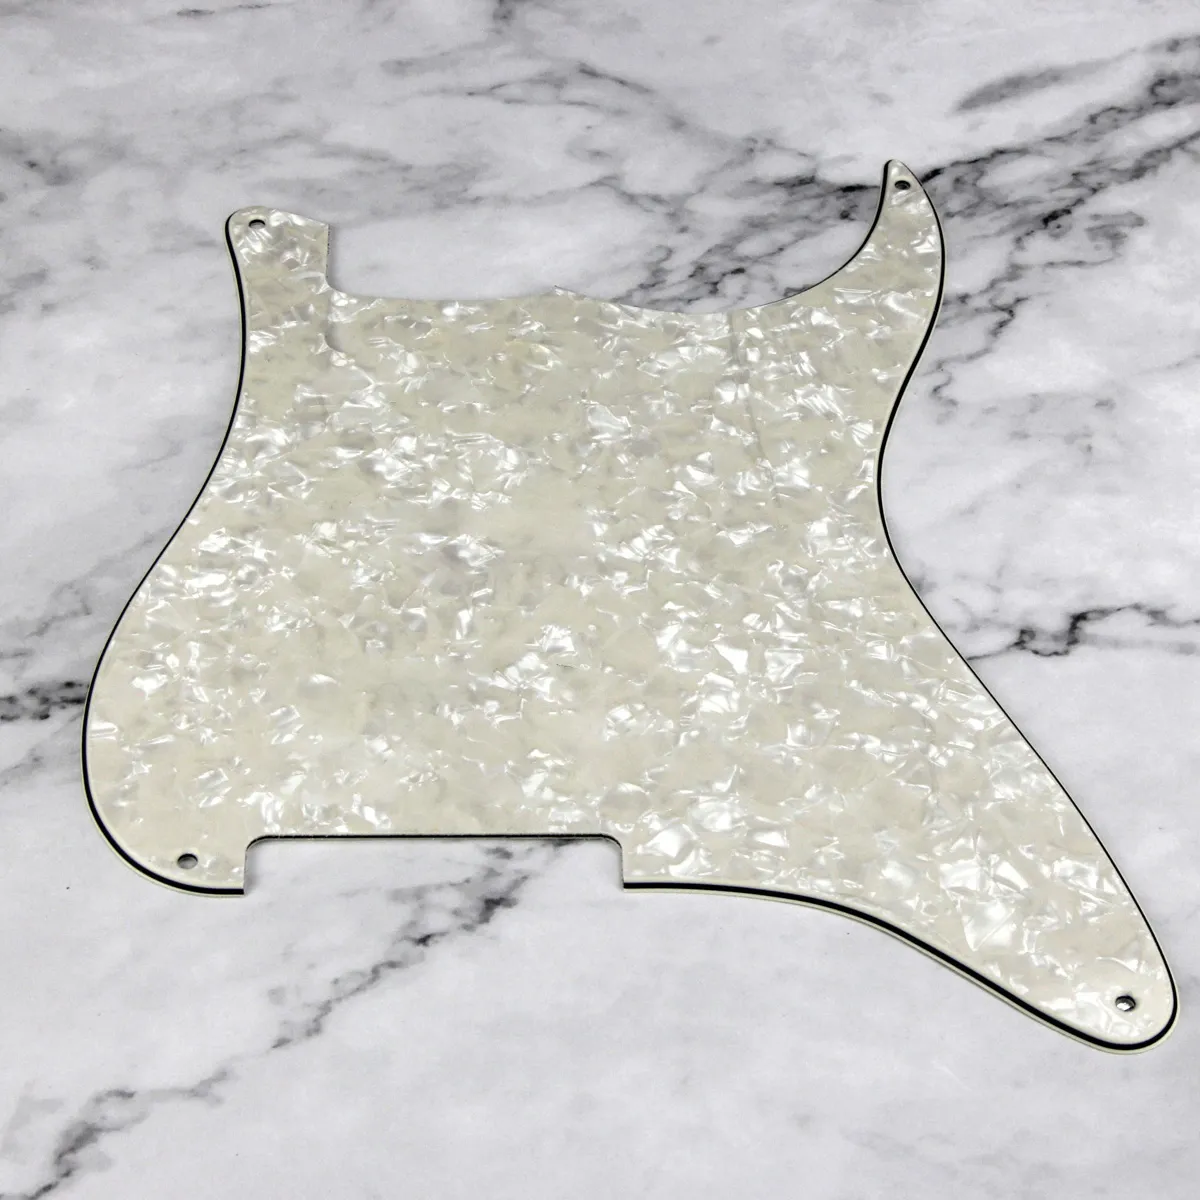 4 Hole Guitar Pickguard Custom Blank Material Scratch Plate with Cavity Cover Screws Multiple Colors